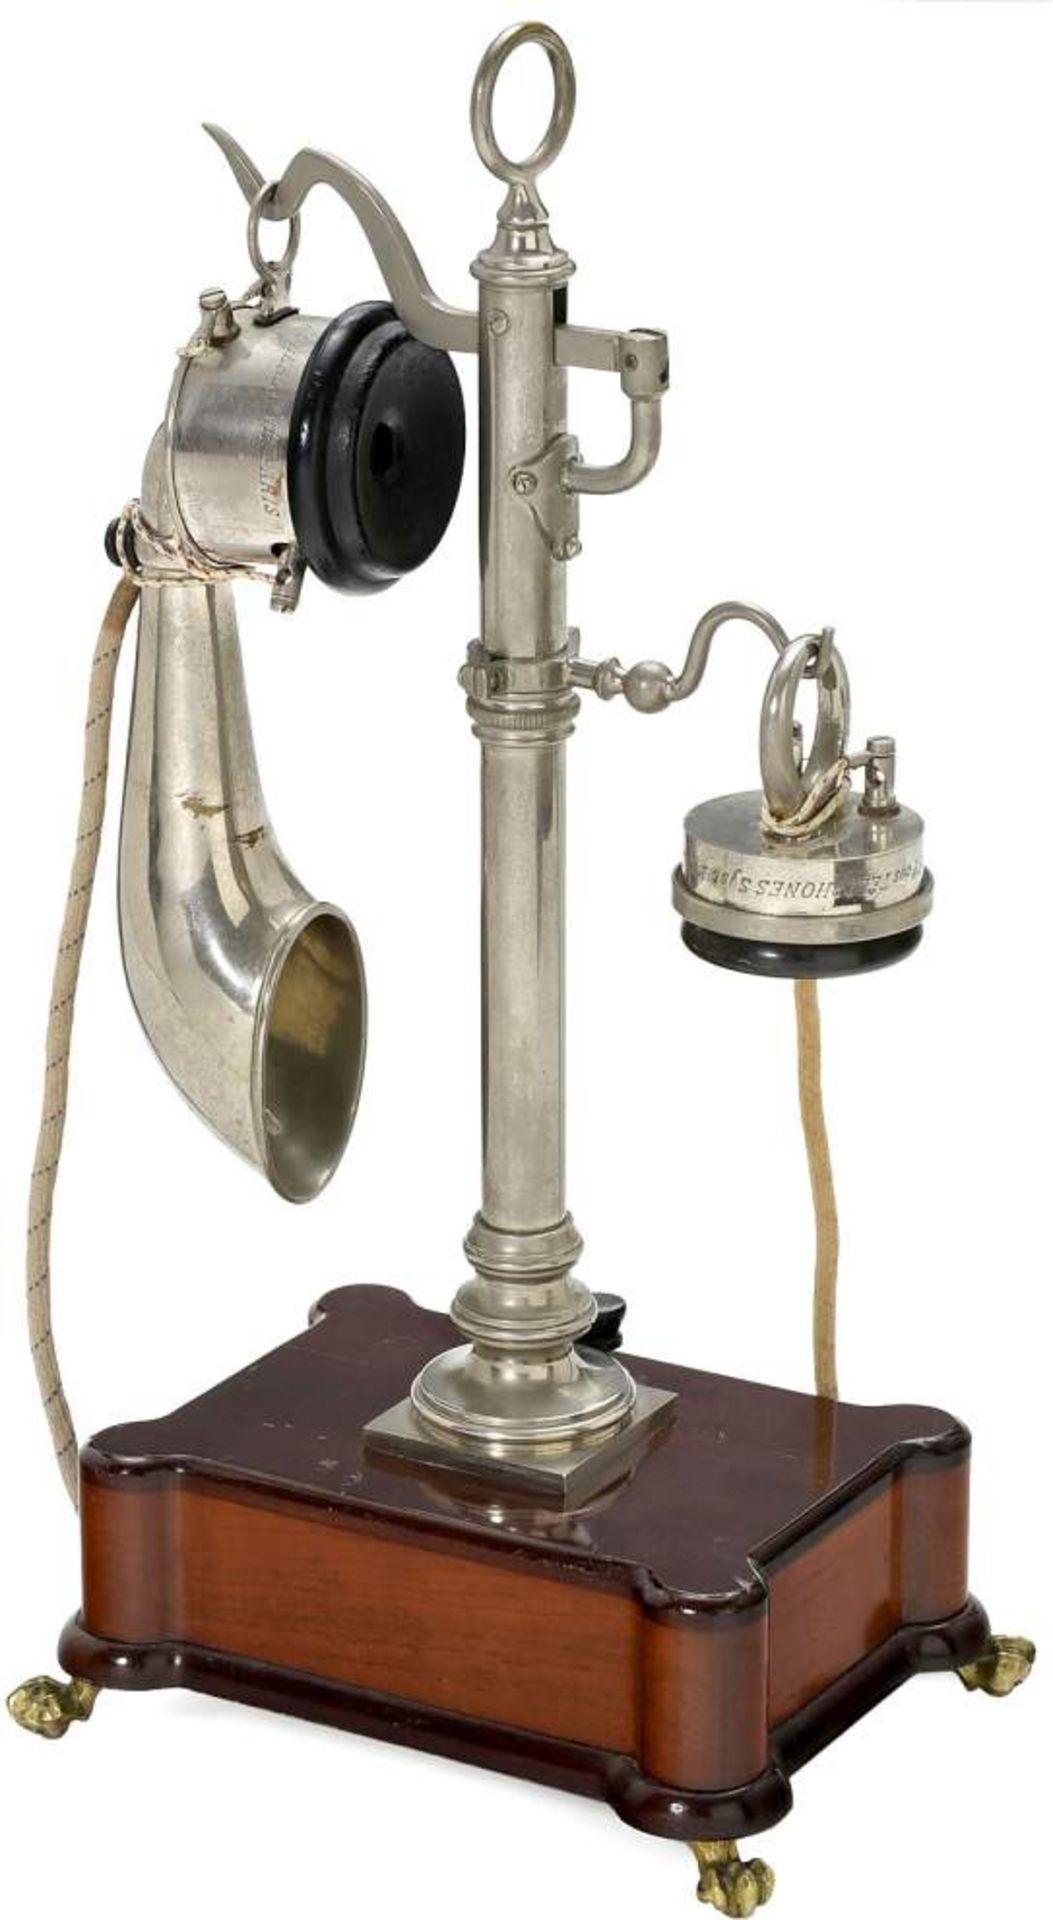 French Desk Telephone System Berliner, c. 1915
No. 6071, with label "S.F.T.S.B. - Paris", "cornet"